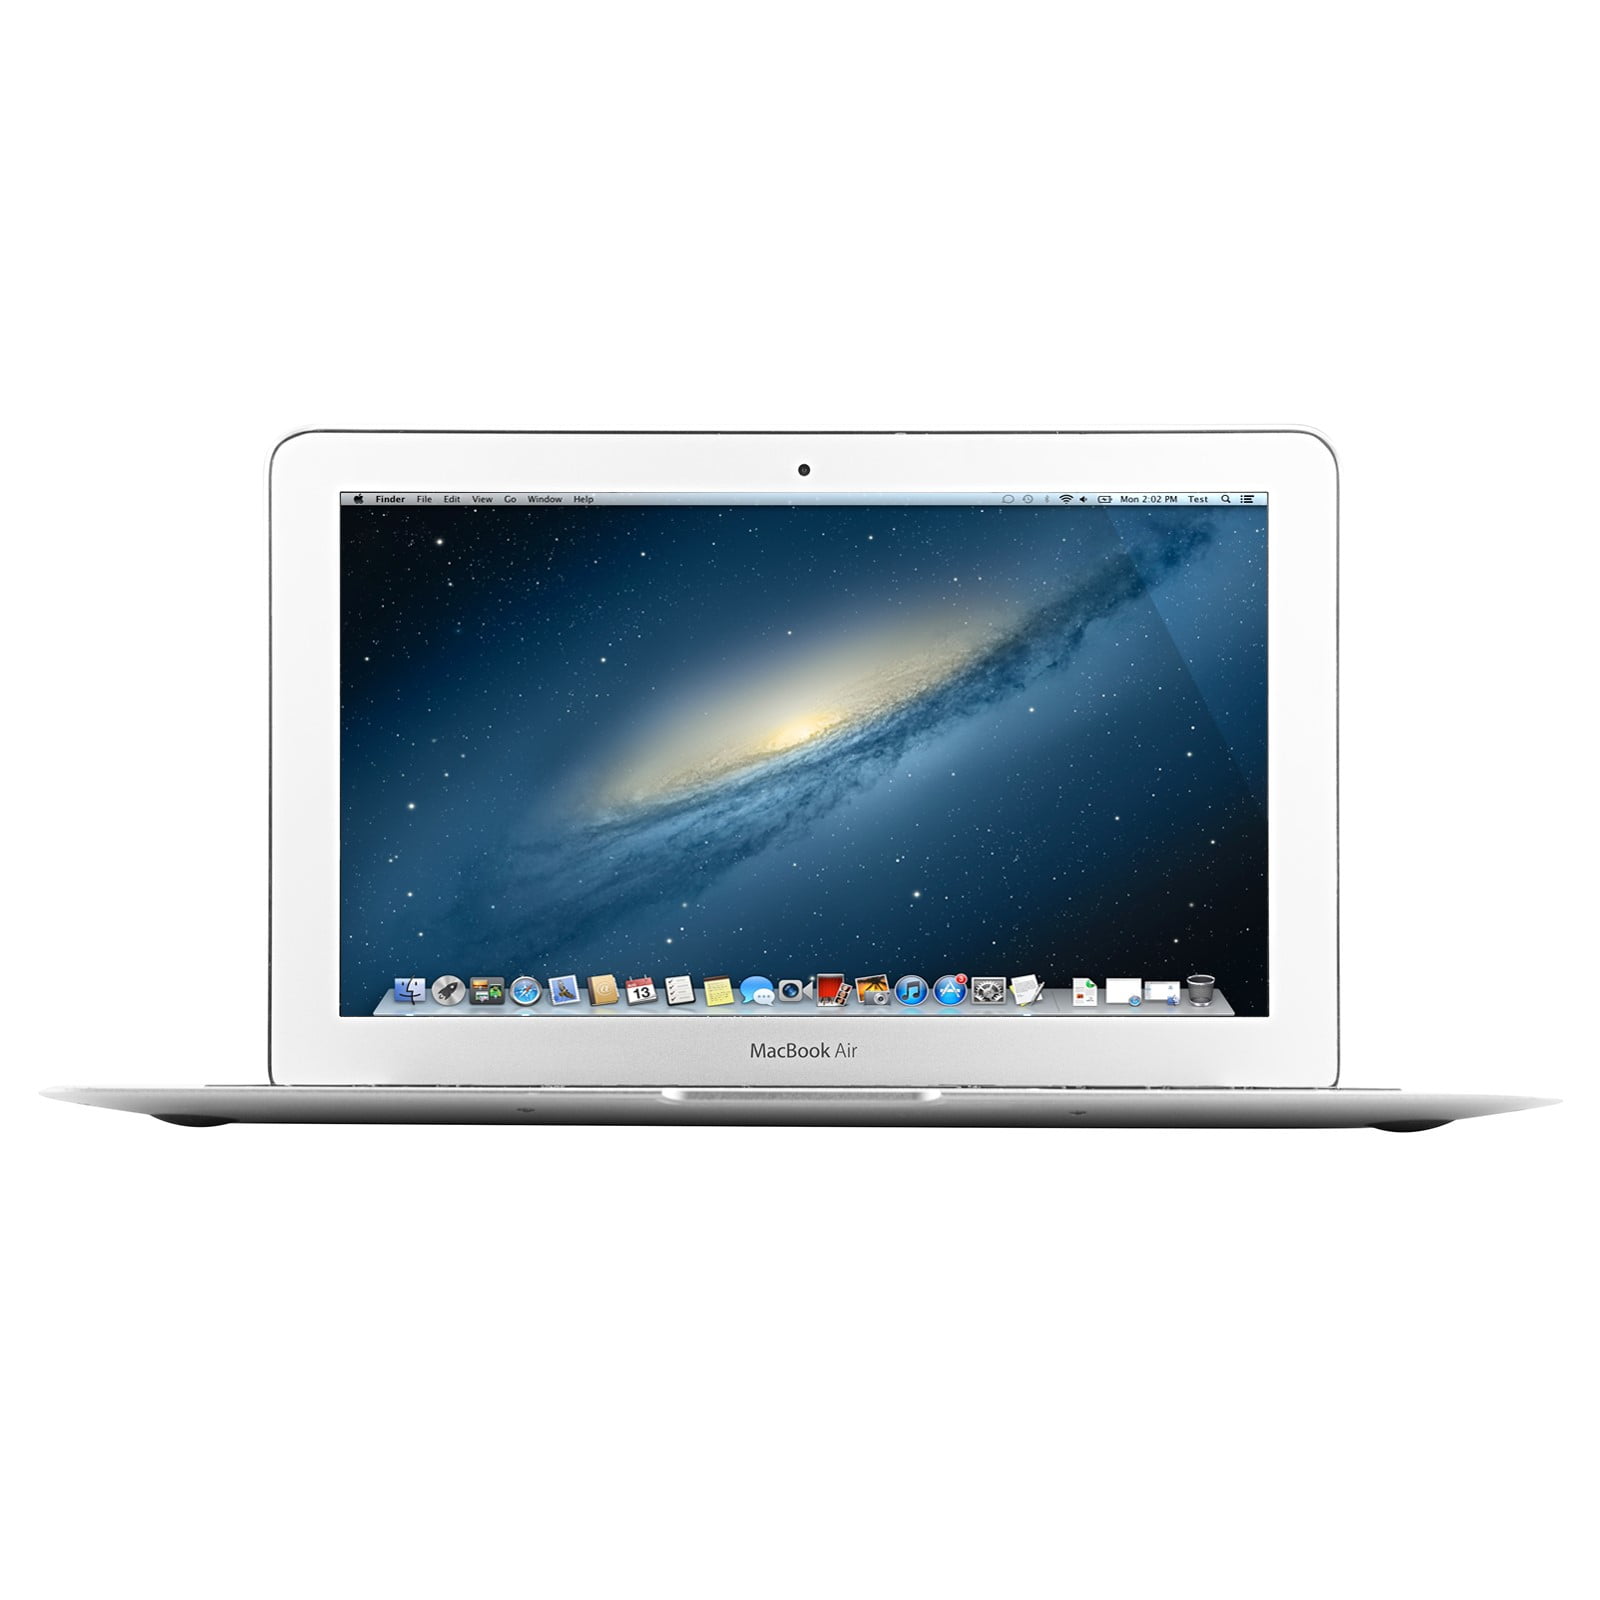 PC/タブレット ノートPC Restored Apple MacBook Air 11.6 Inch Laptop MD711LL/A (Refurbished)